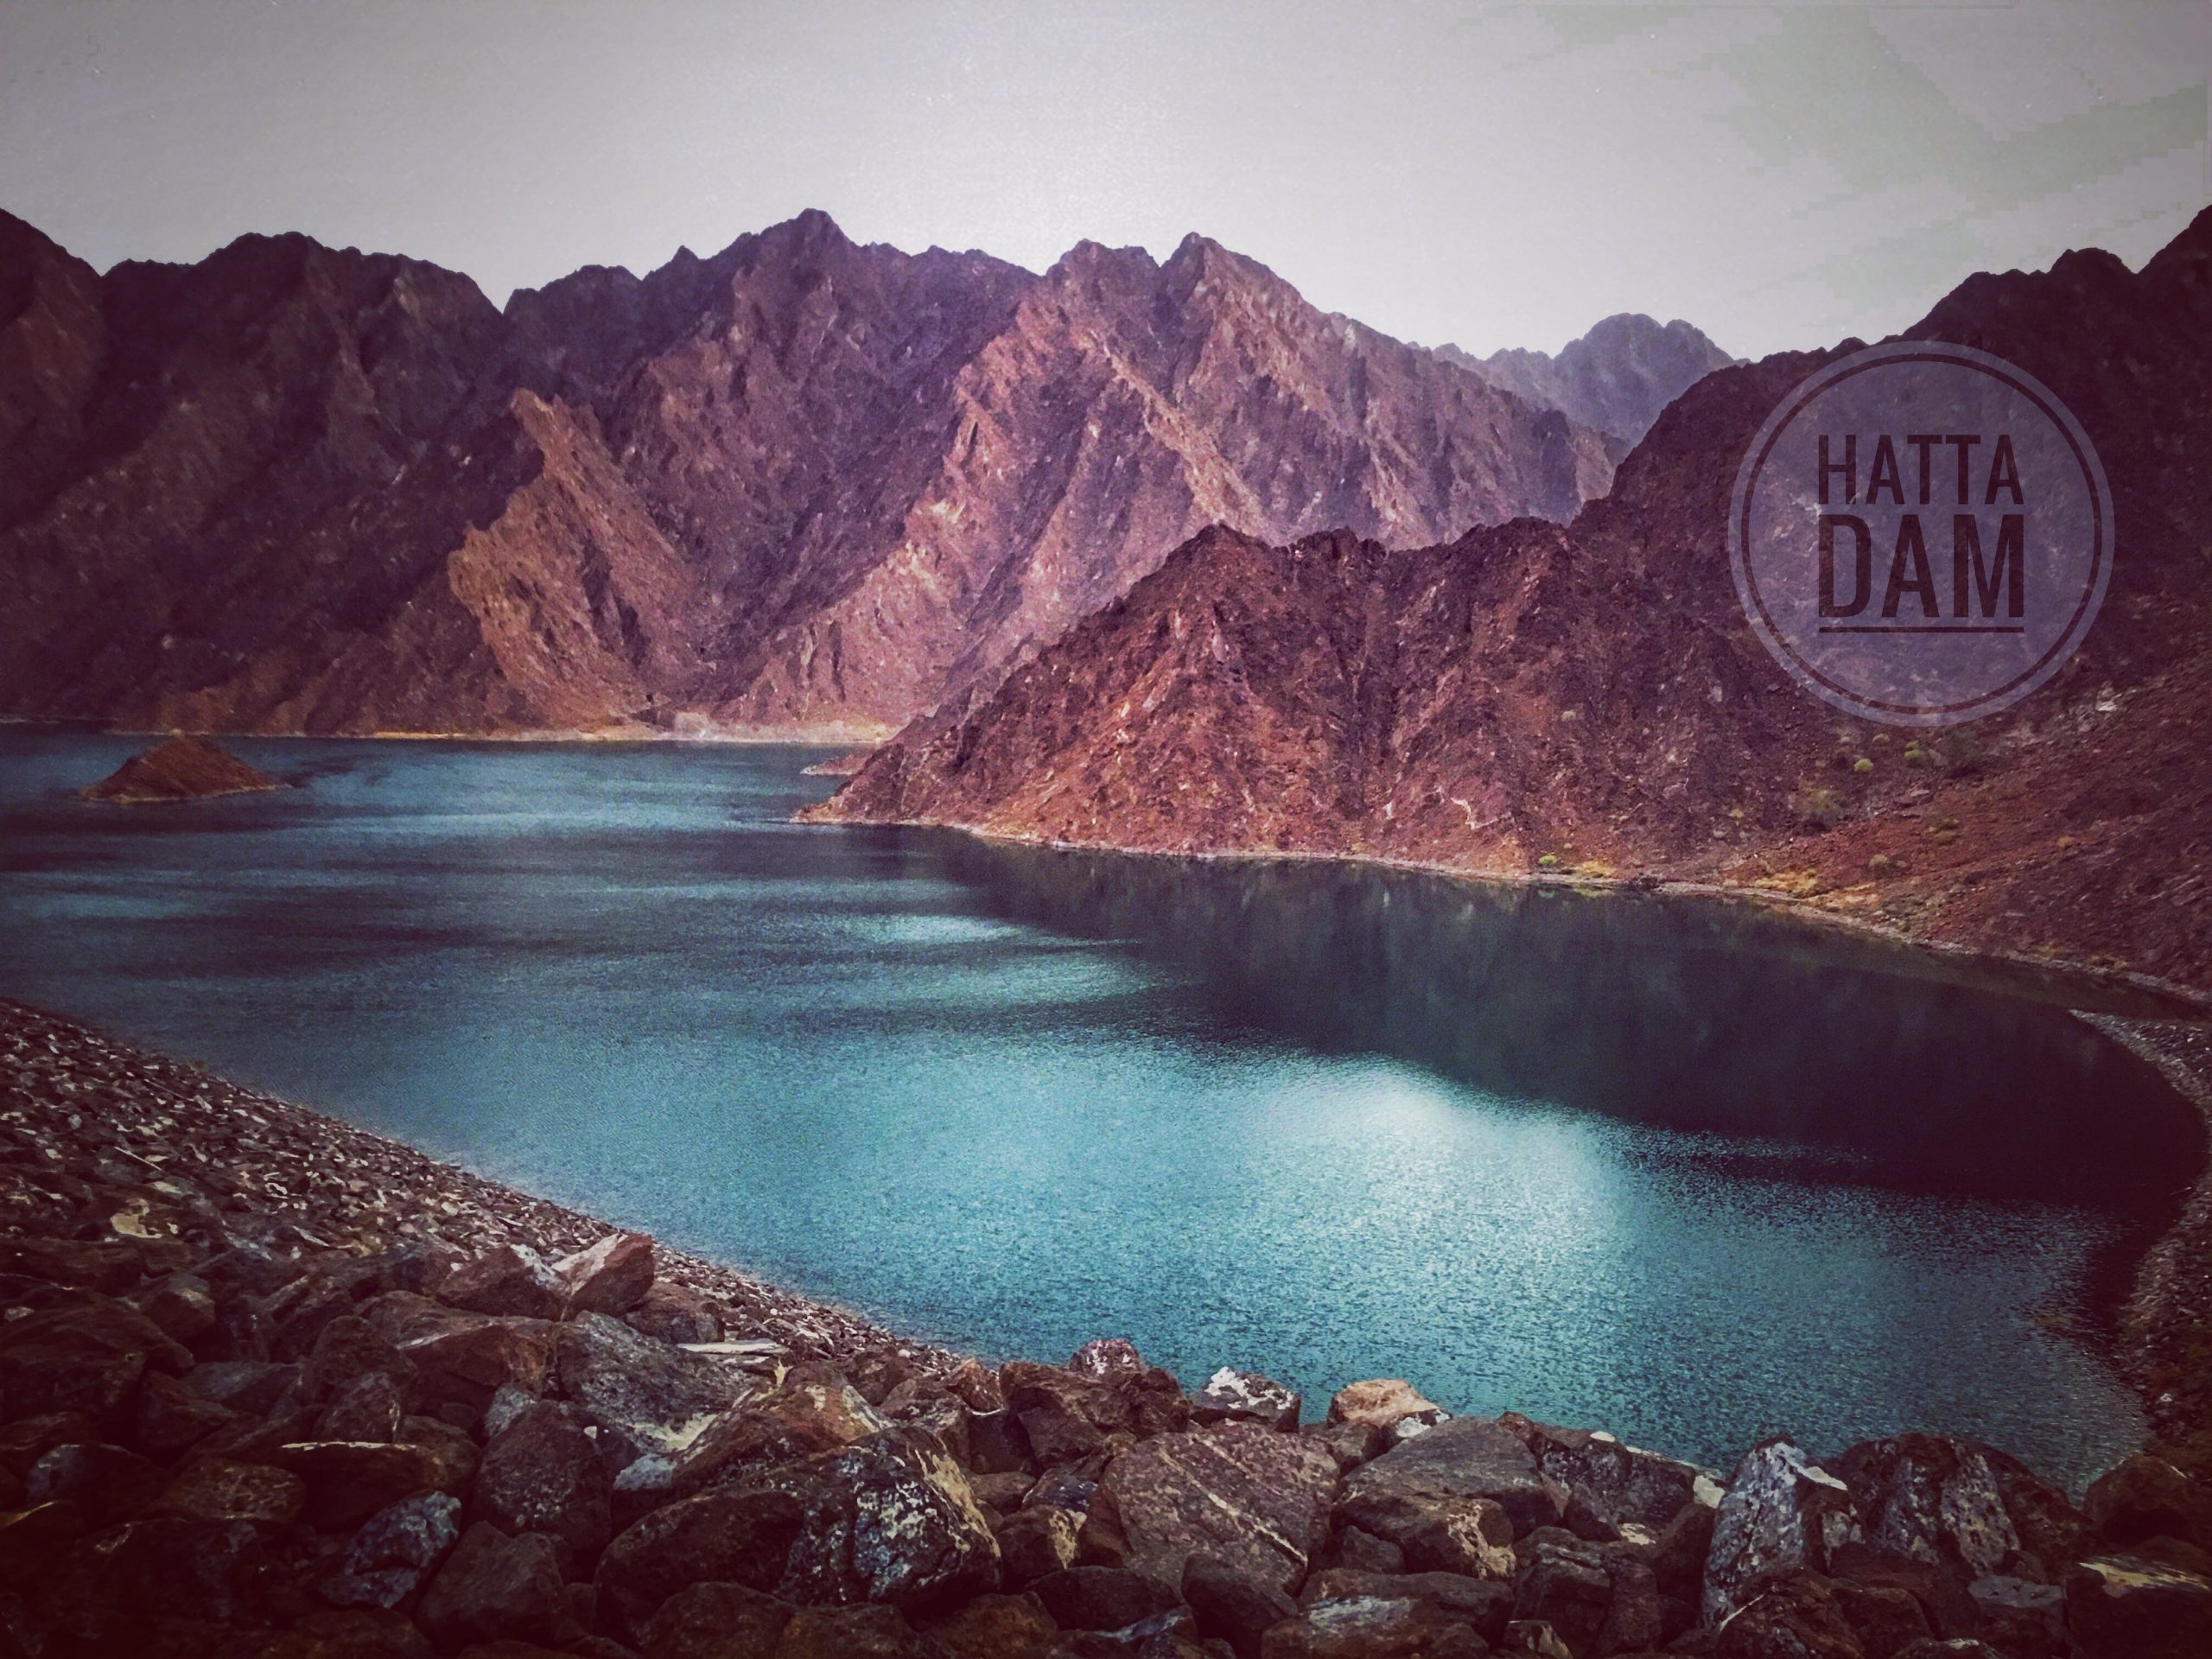 Things to do in Hatta